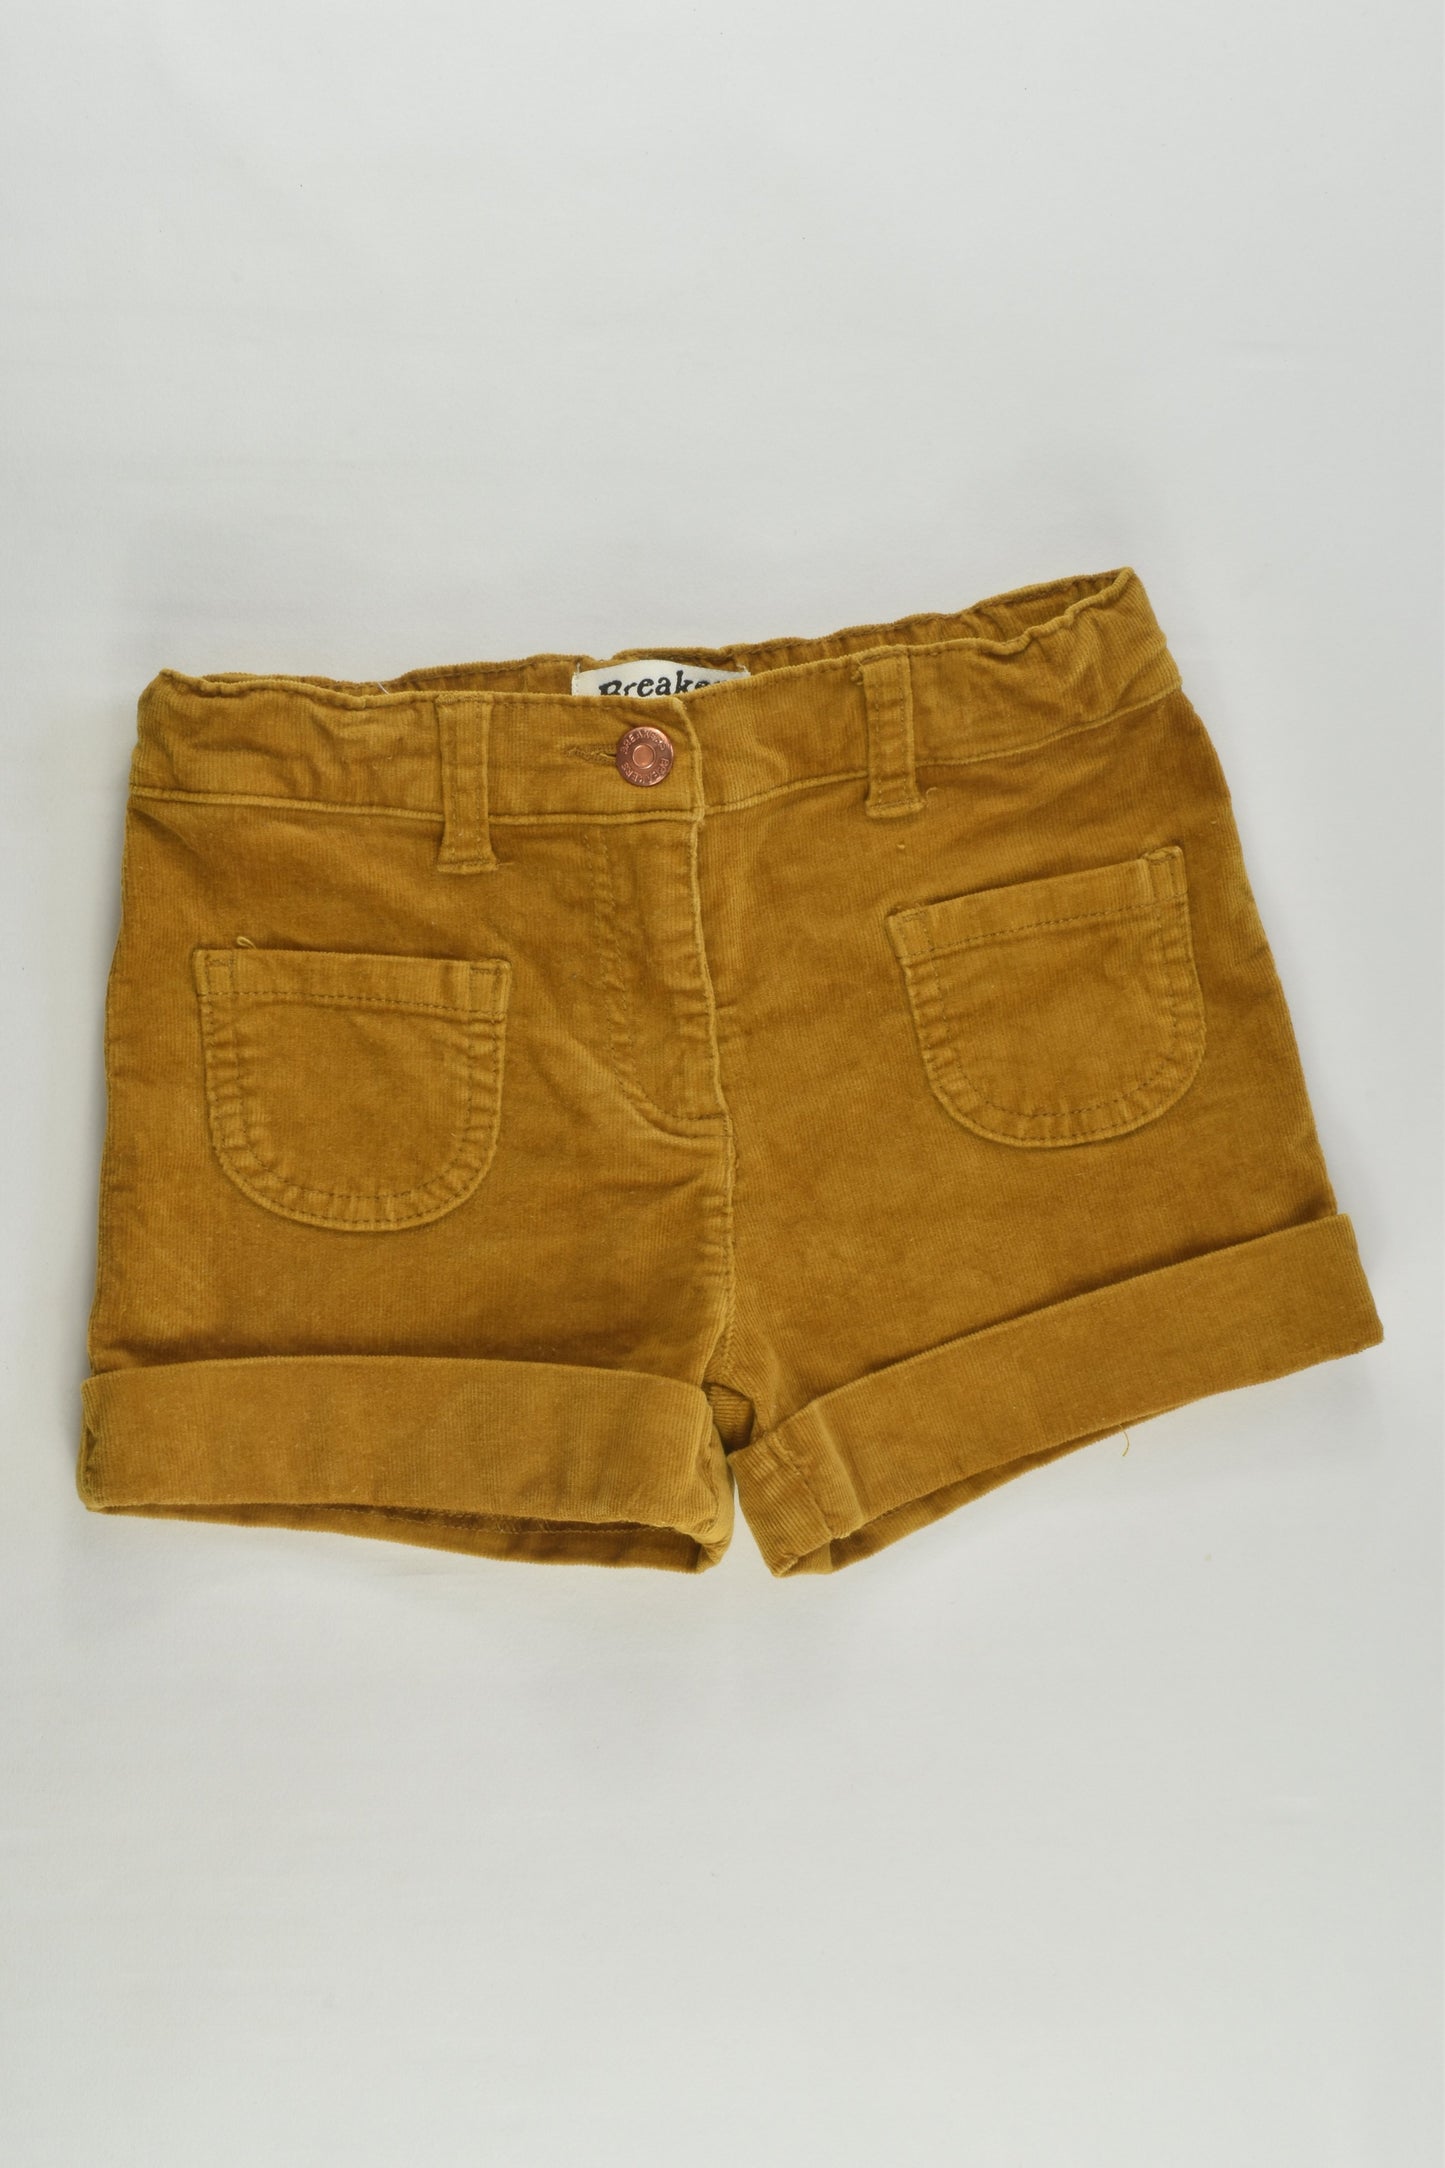 Breakers Size 5 Stretchy Cord Shorts